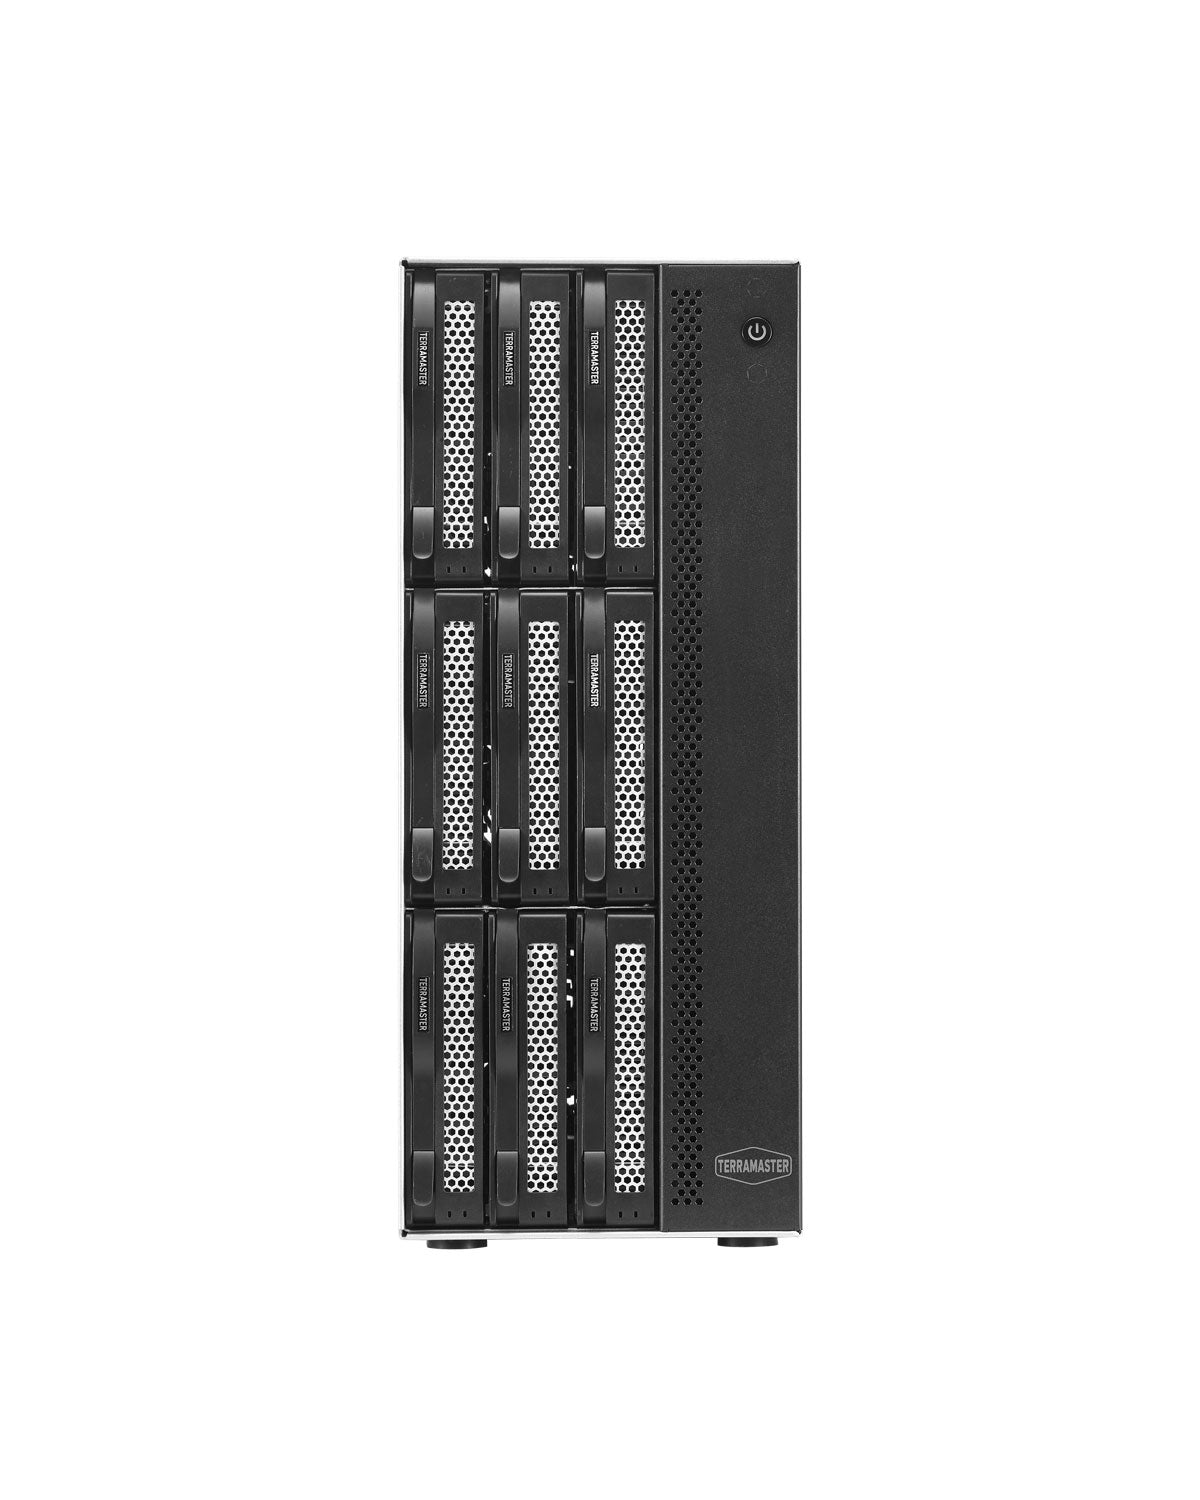 TERRAMASTER T9-450 9Bay 10Gb NAS Storage - High Speed Network Attached Storage with Intel Quad-core CPU, 8GB DDR4, Dual SFP+ 10GbE Interfaces, Dual 2.5GbE Ports, NAS Server (Diskless)